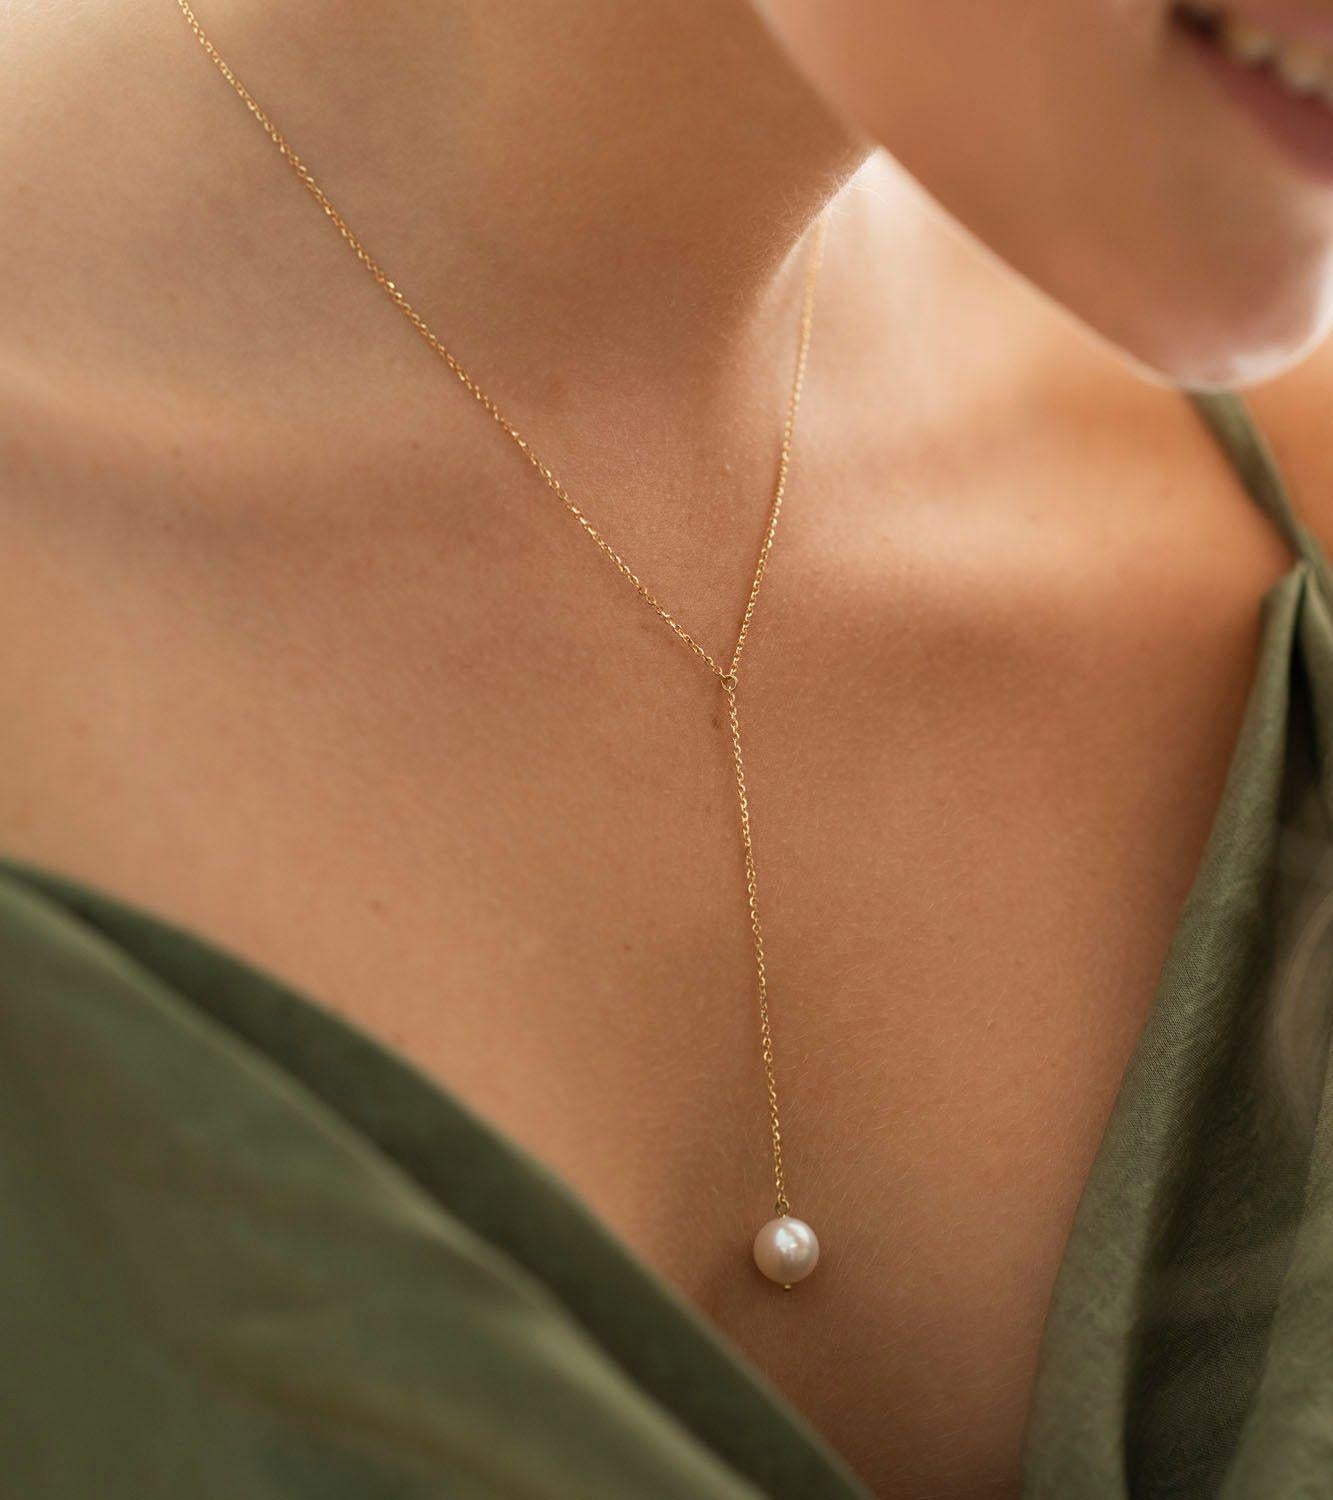 The Pearl Lariat necklace features a lustrous freshwater pearl, with size 9mm-10mm  suspended from a delicate and sparkly 18Karat Yellow gold chain.

The simplicity of its design, gives it a timeless appeal and offers a modern and fresh approach to